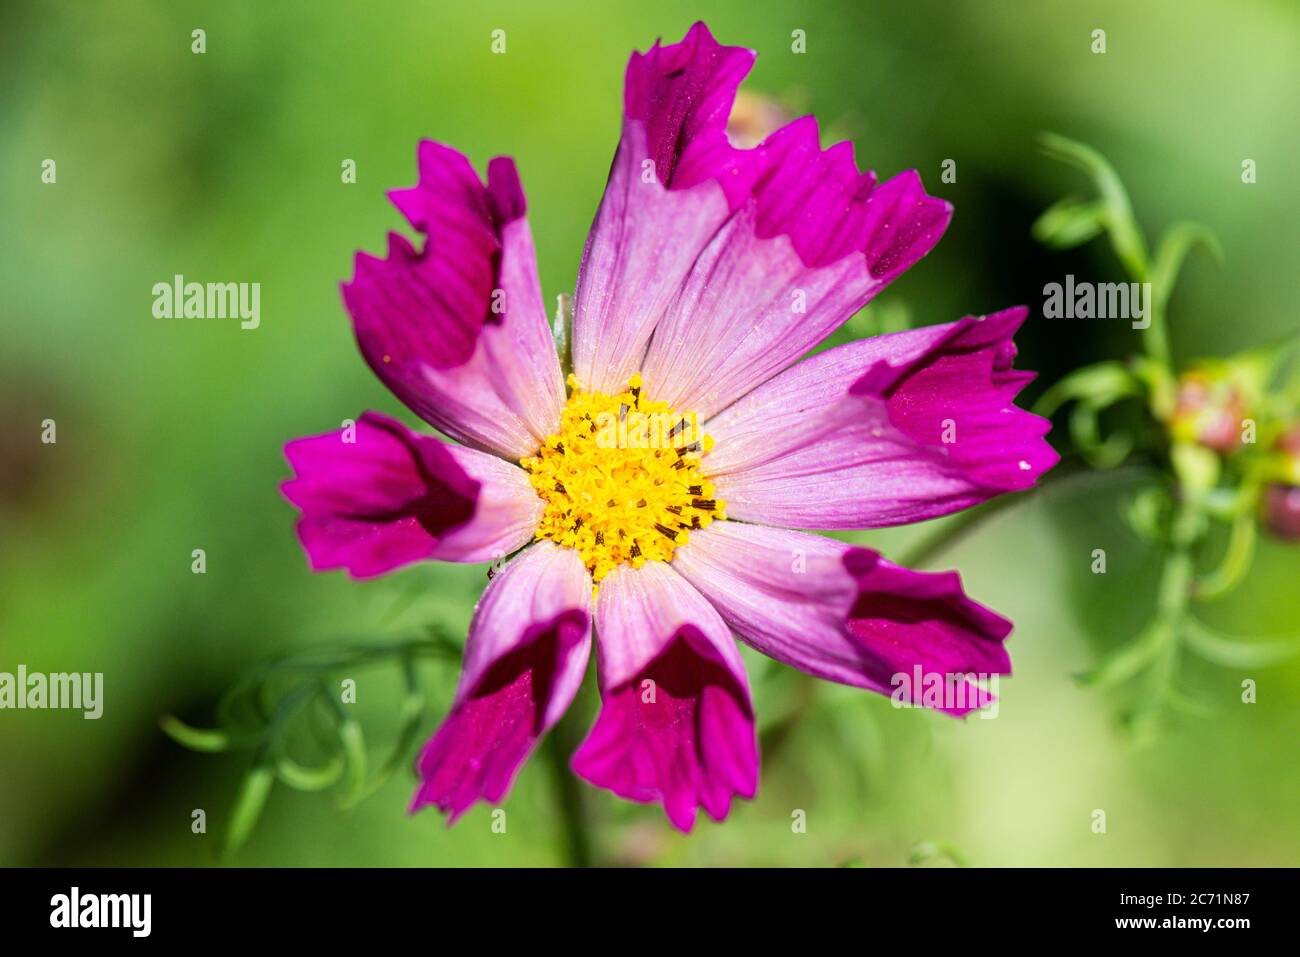 The flower of a Cosmos 'Sea Shells' Stock Photo